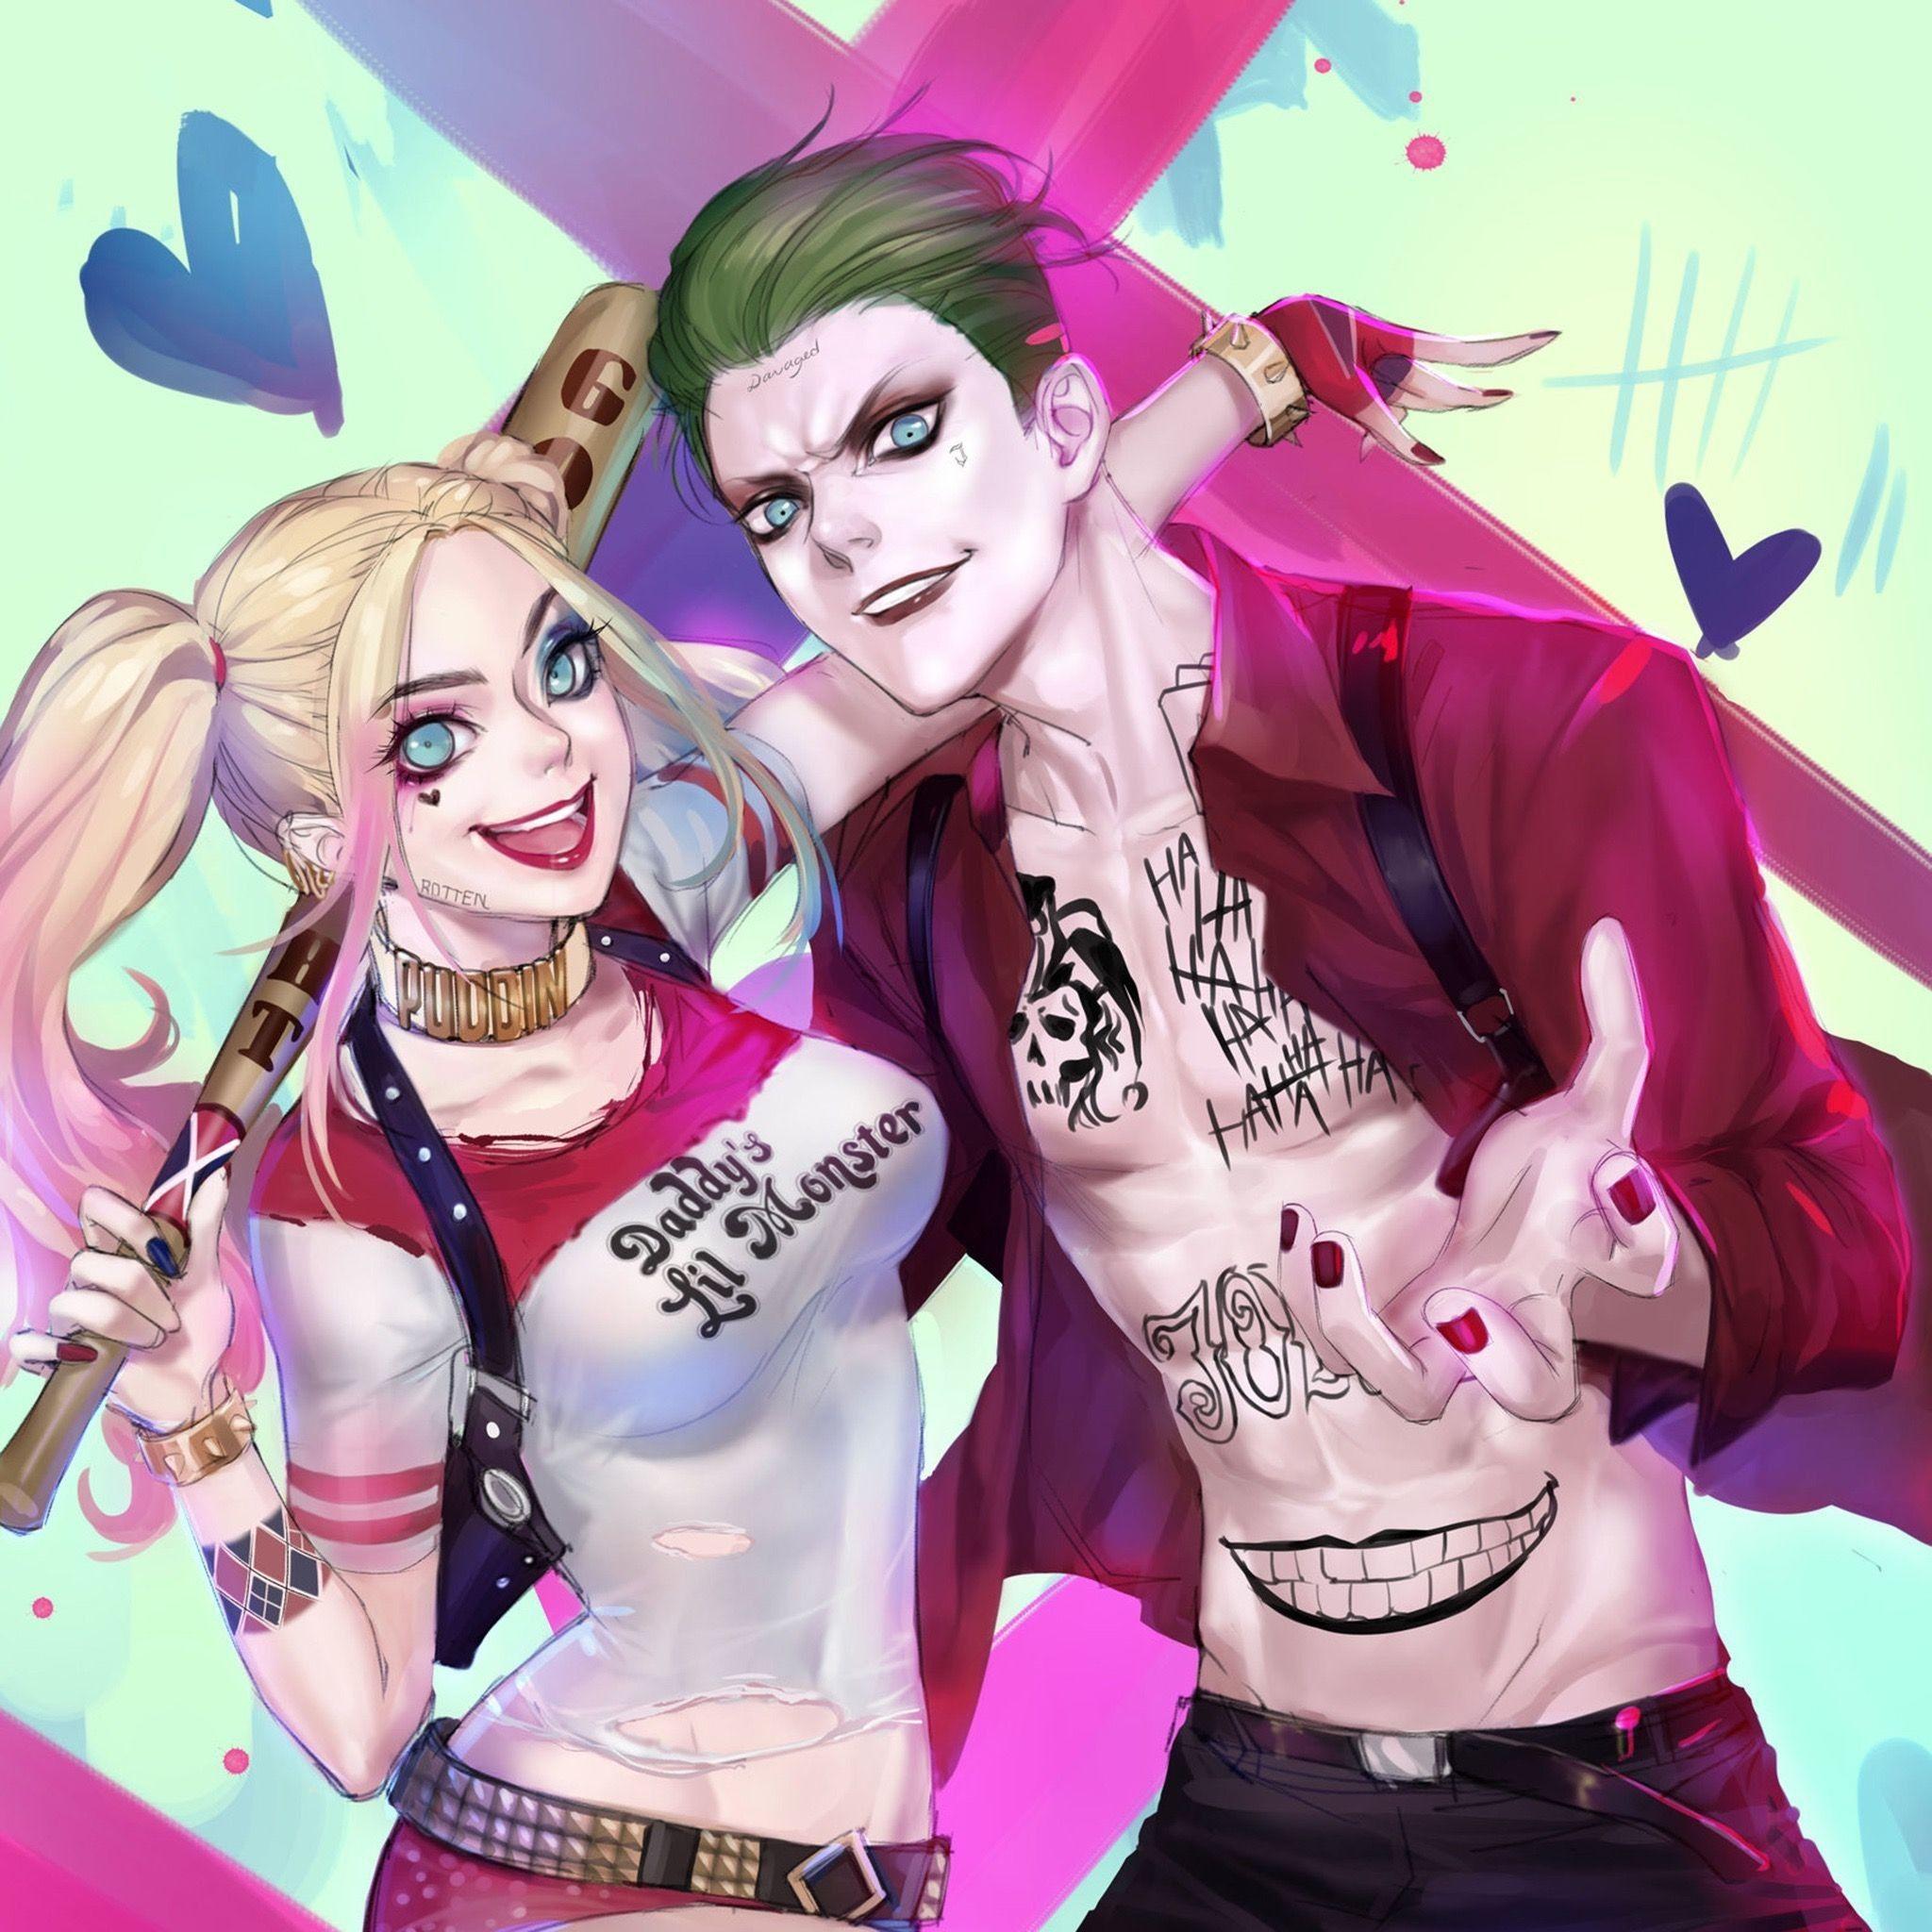 Joker and Harley Quinn Suicide Squad Wallpapers - Top Free Joker and ...